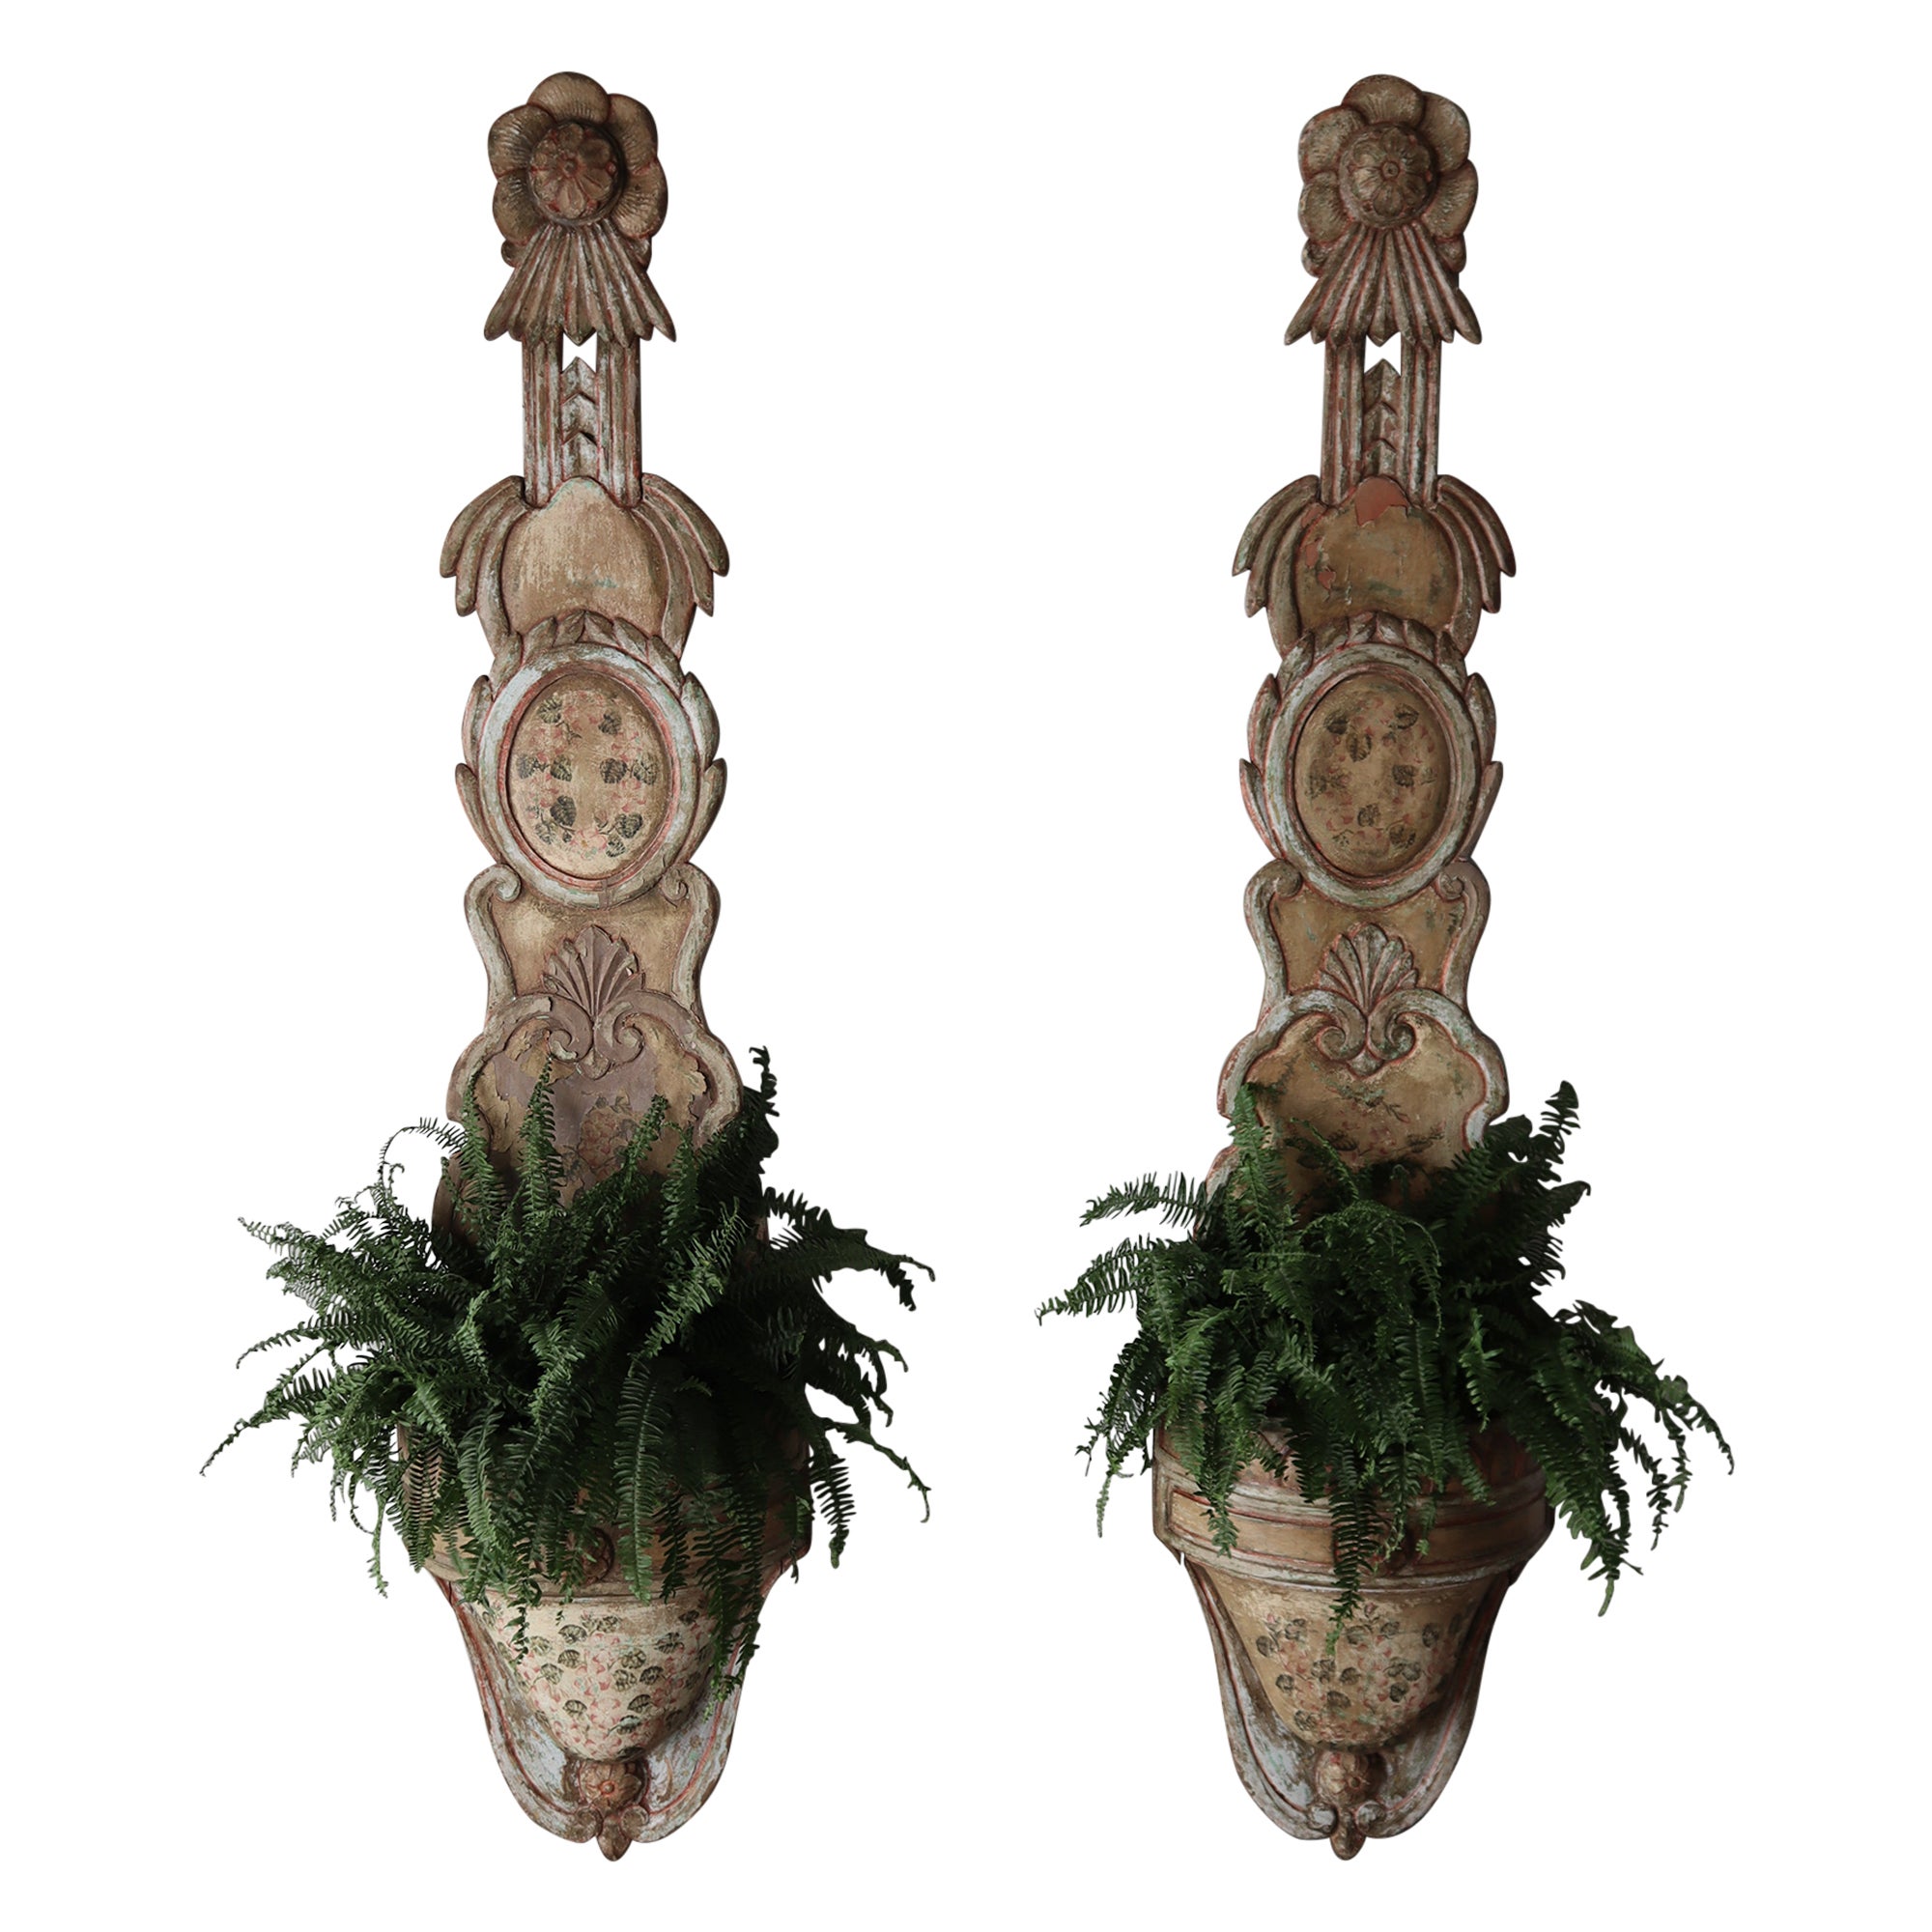 8ft Tall Pair of Antique European Wood Jardiniere Planters For Sale